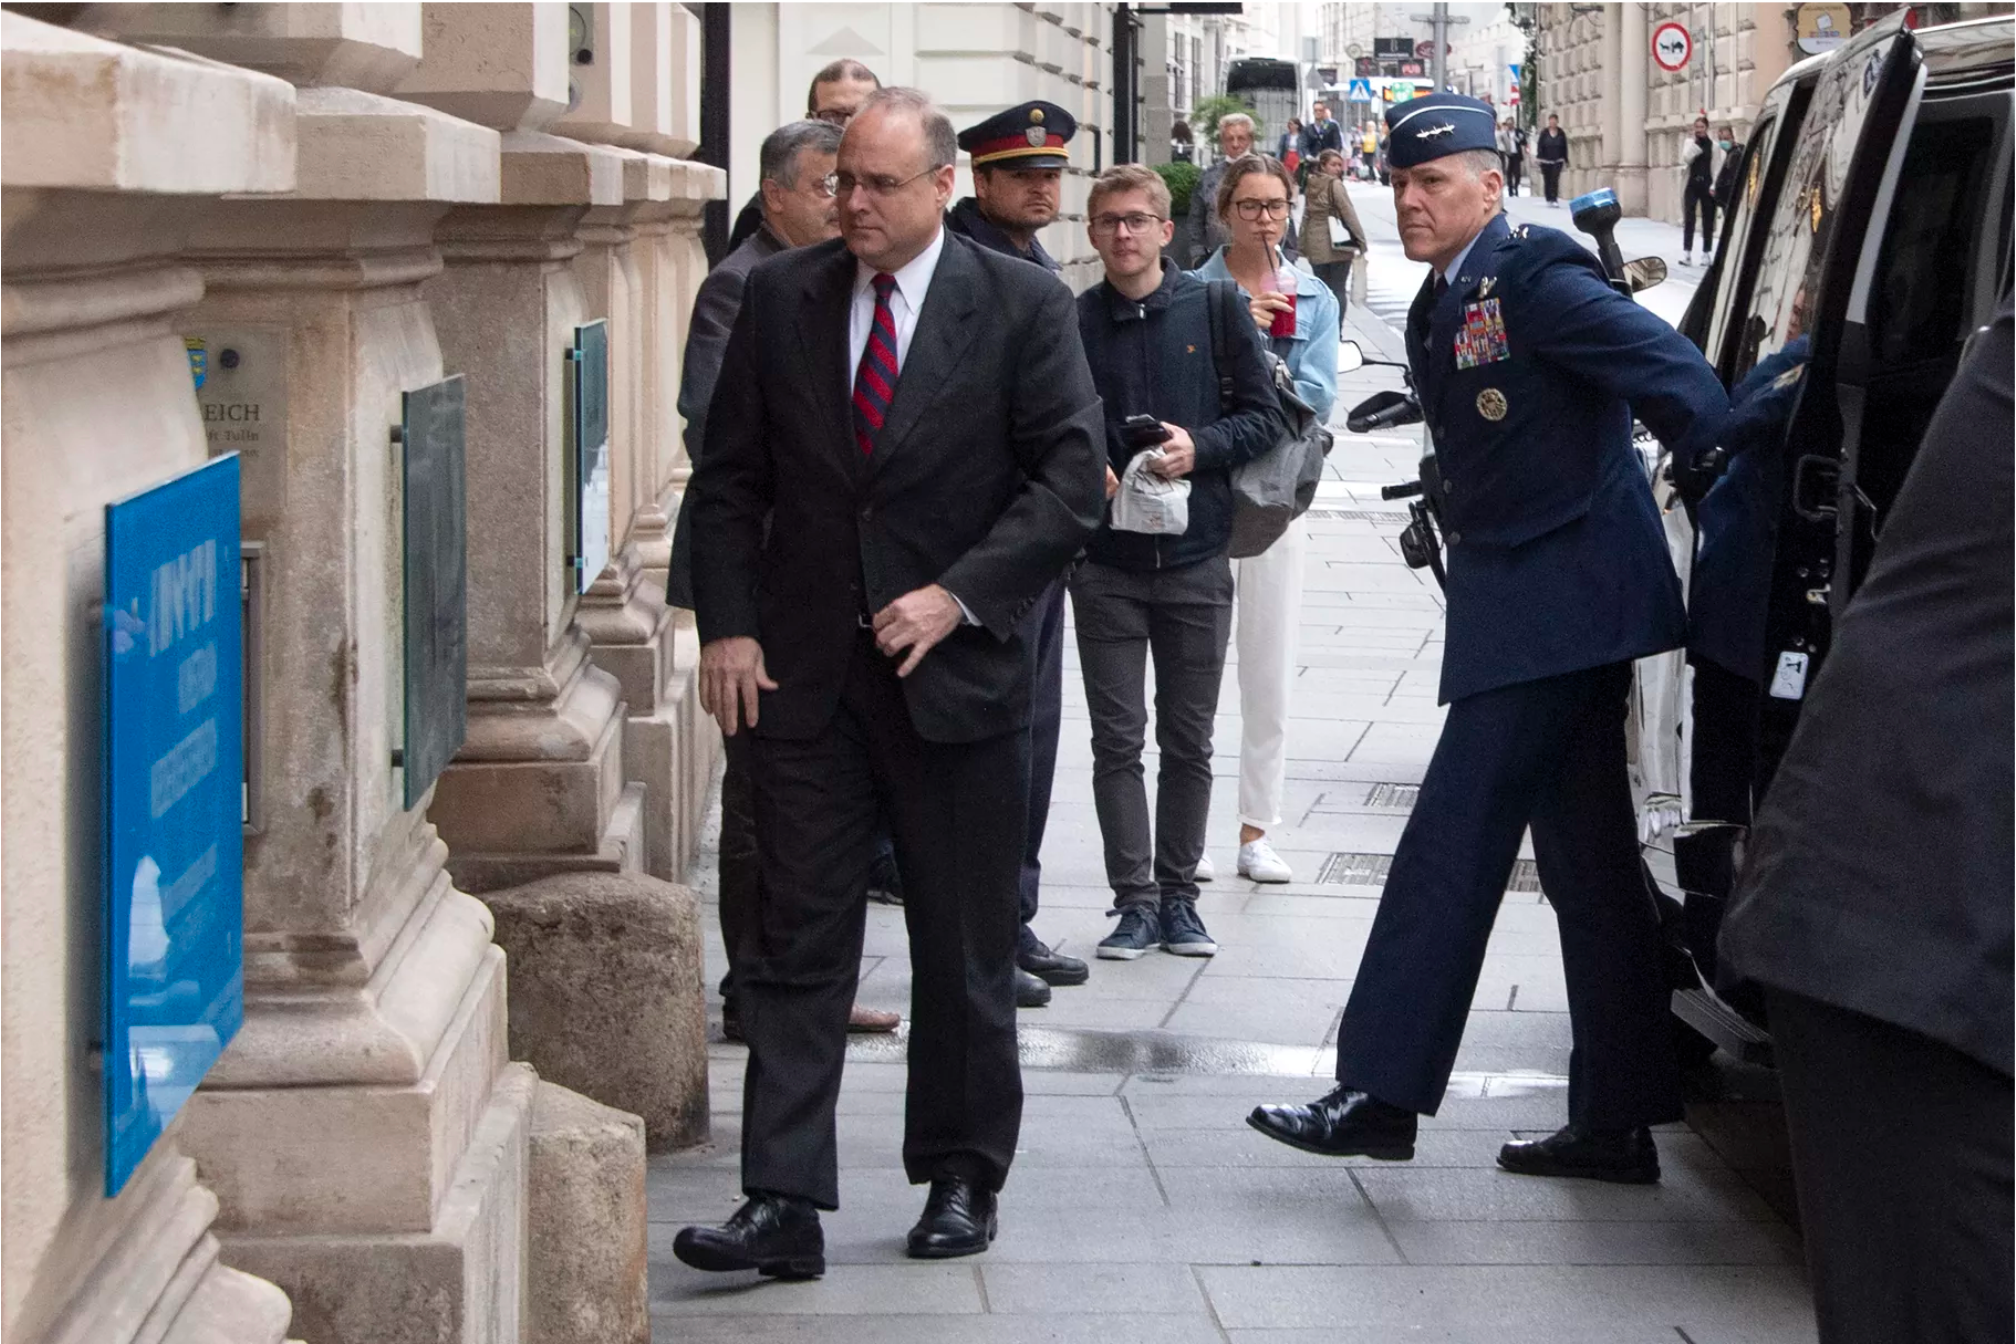 Marshall Billingslea, special presidential envoy for arms control, arrives for the US-Russia meeting at the Palais Niederoestereich in Vienna on June 22, 2020.